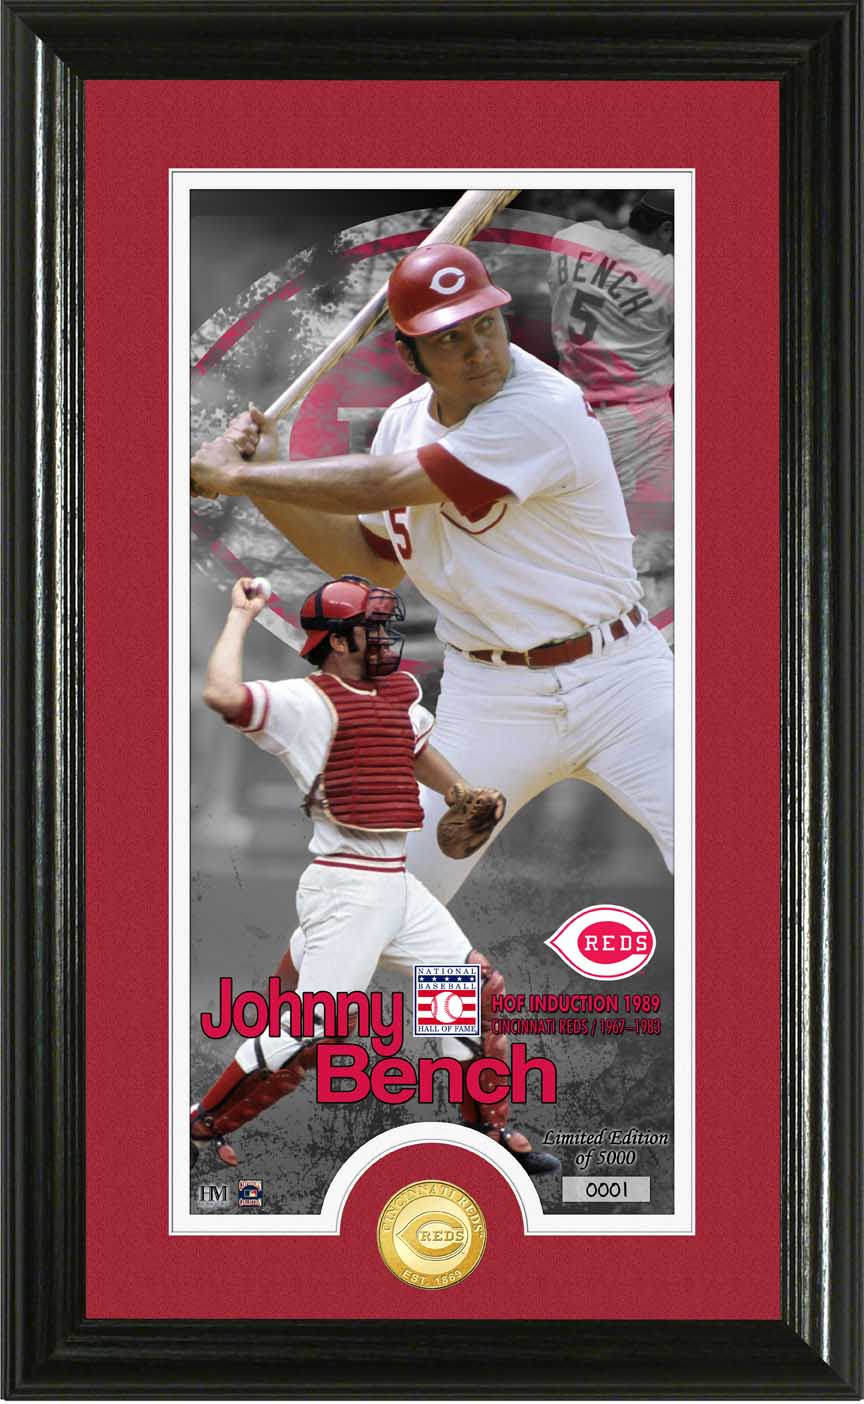 Johnny Bench National Baseball Hall of Fame Supreme Bronze Coin Photo Mint